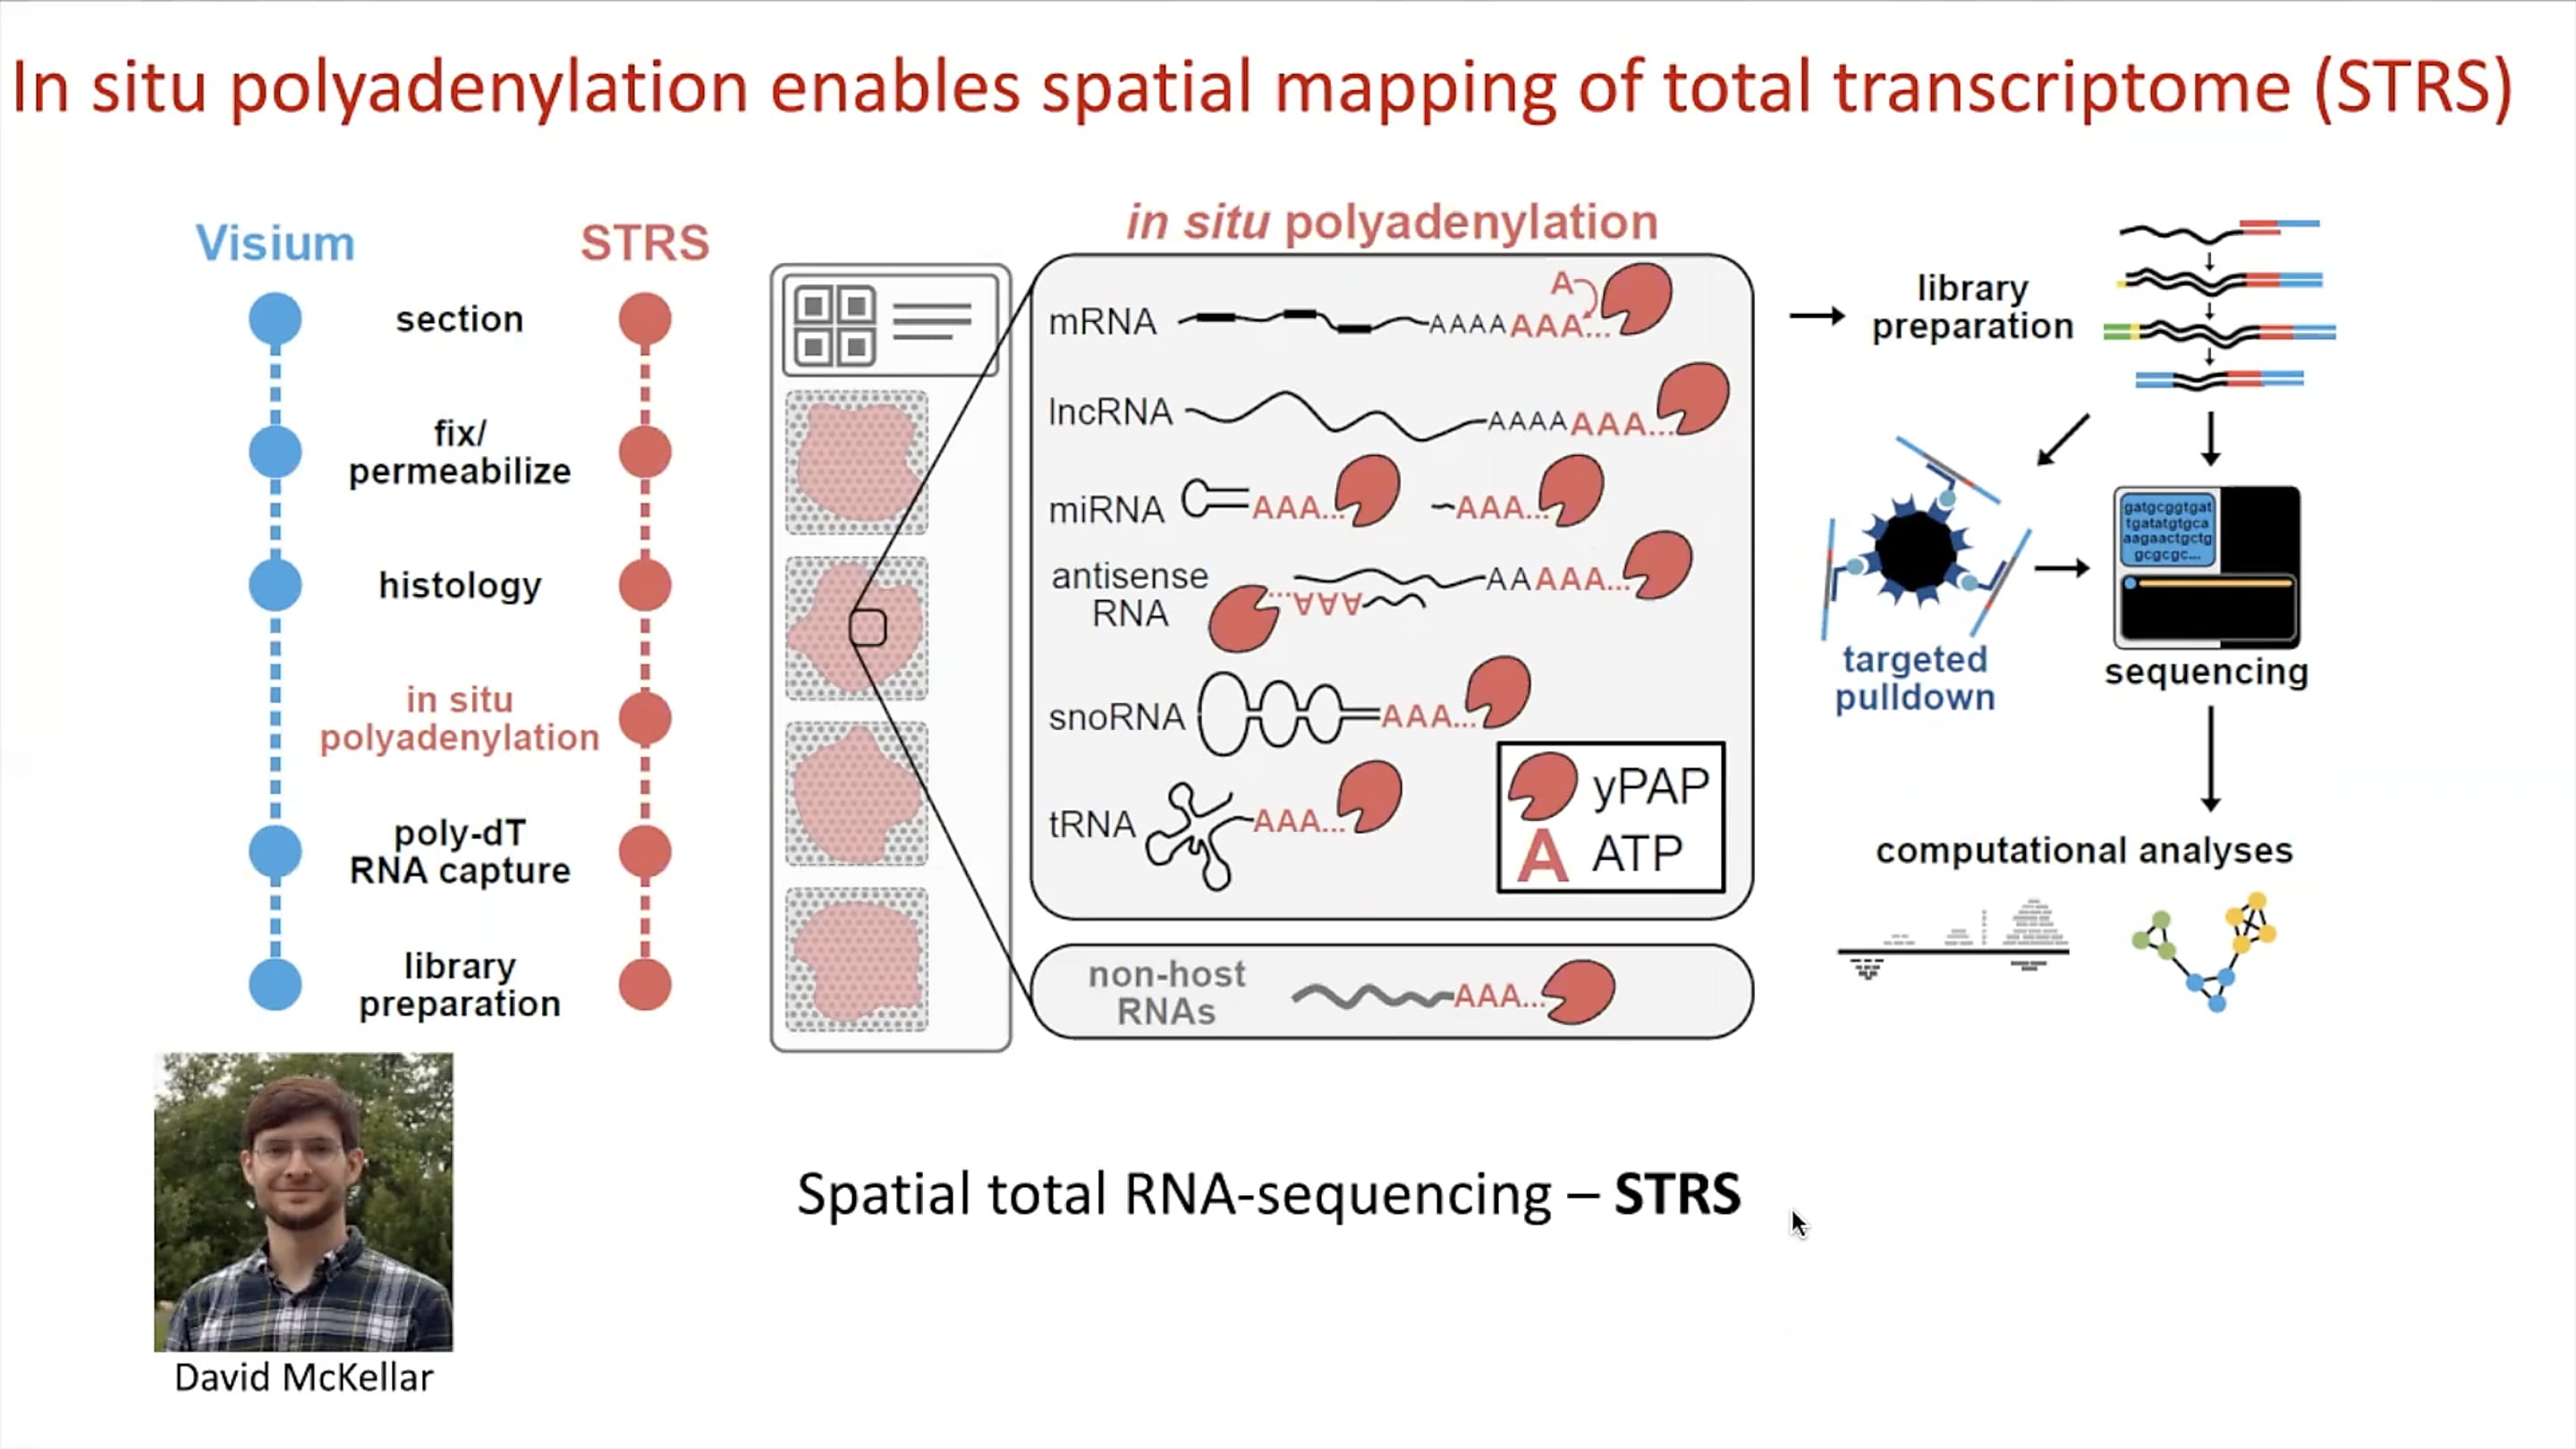 Representation of the spatial total RNA-sequencing (STRS) method. Credit: McKellar D, et al. In situ polyadenylation enables spatial mapping of the total transcriptome. bioRxiv (2022). https://doi.org/10.1101/2022.04.20.488964